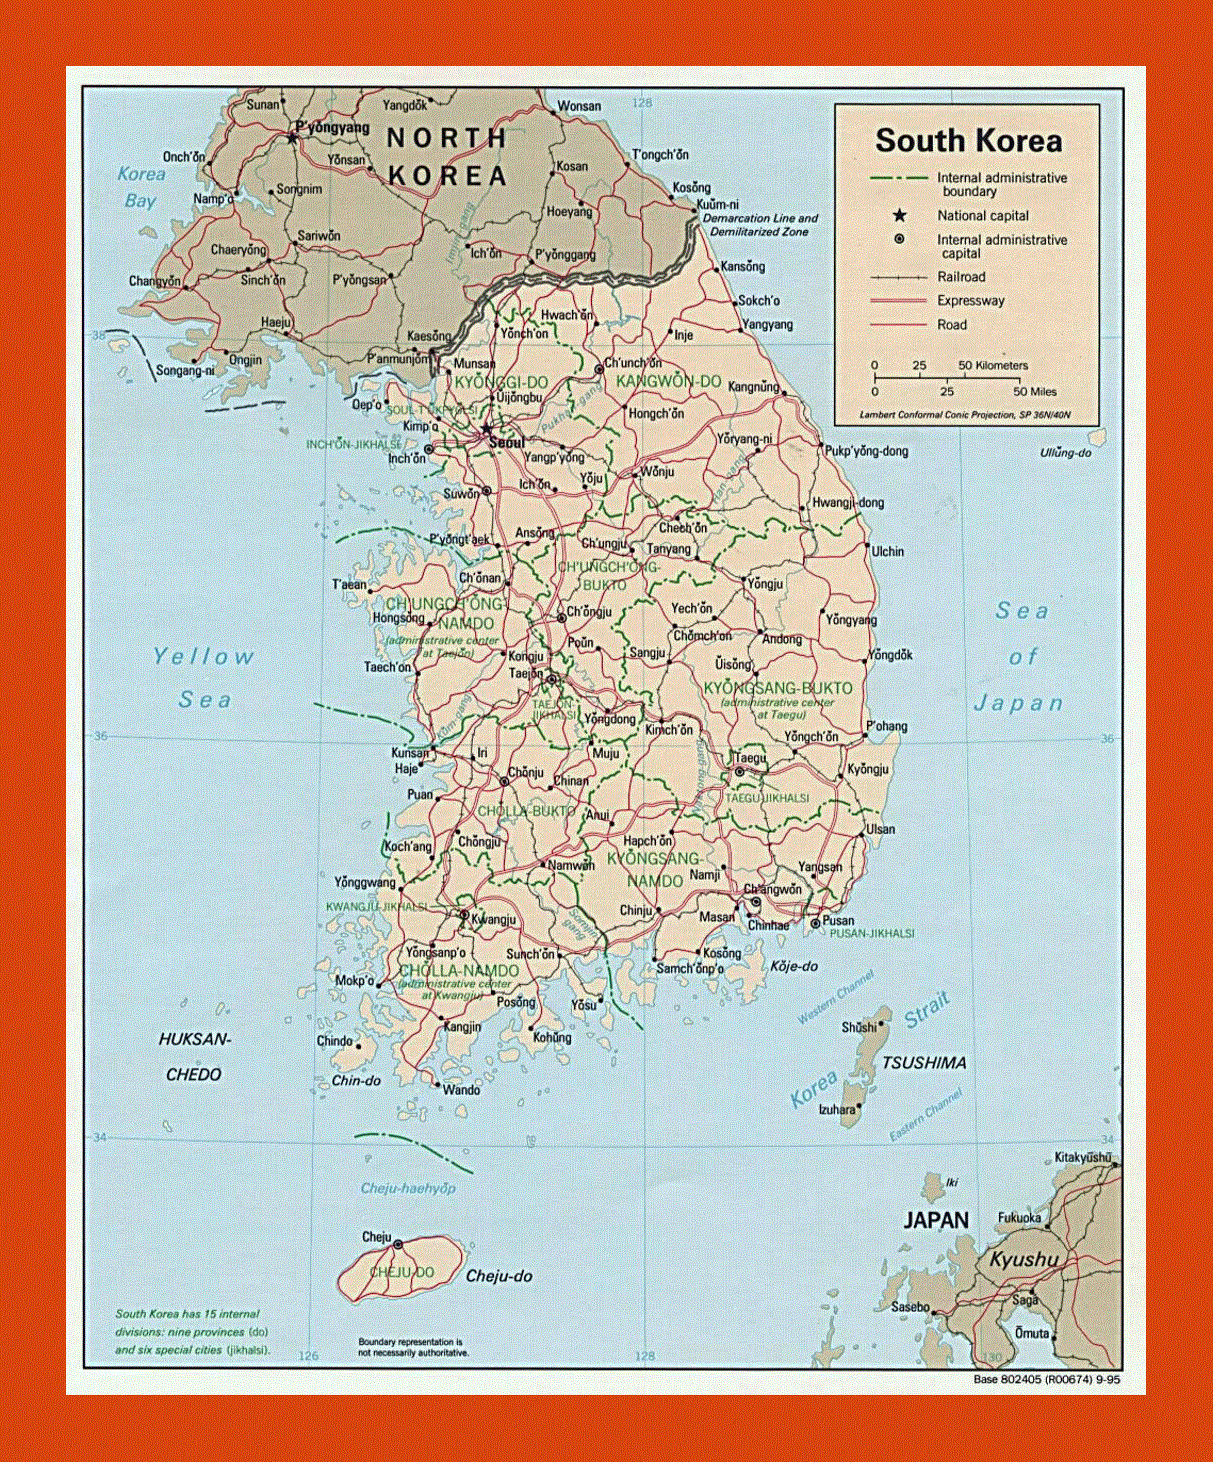 Political and administrative map of South Korea - 1995